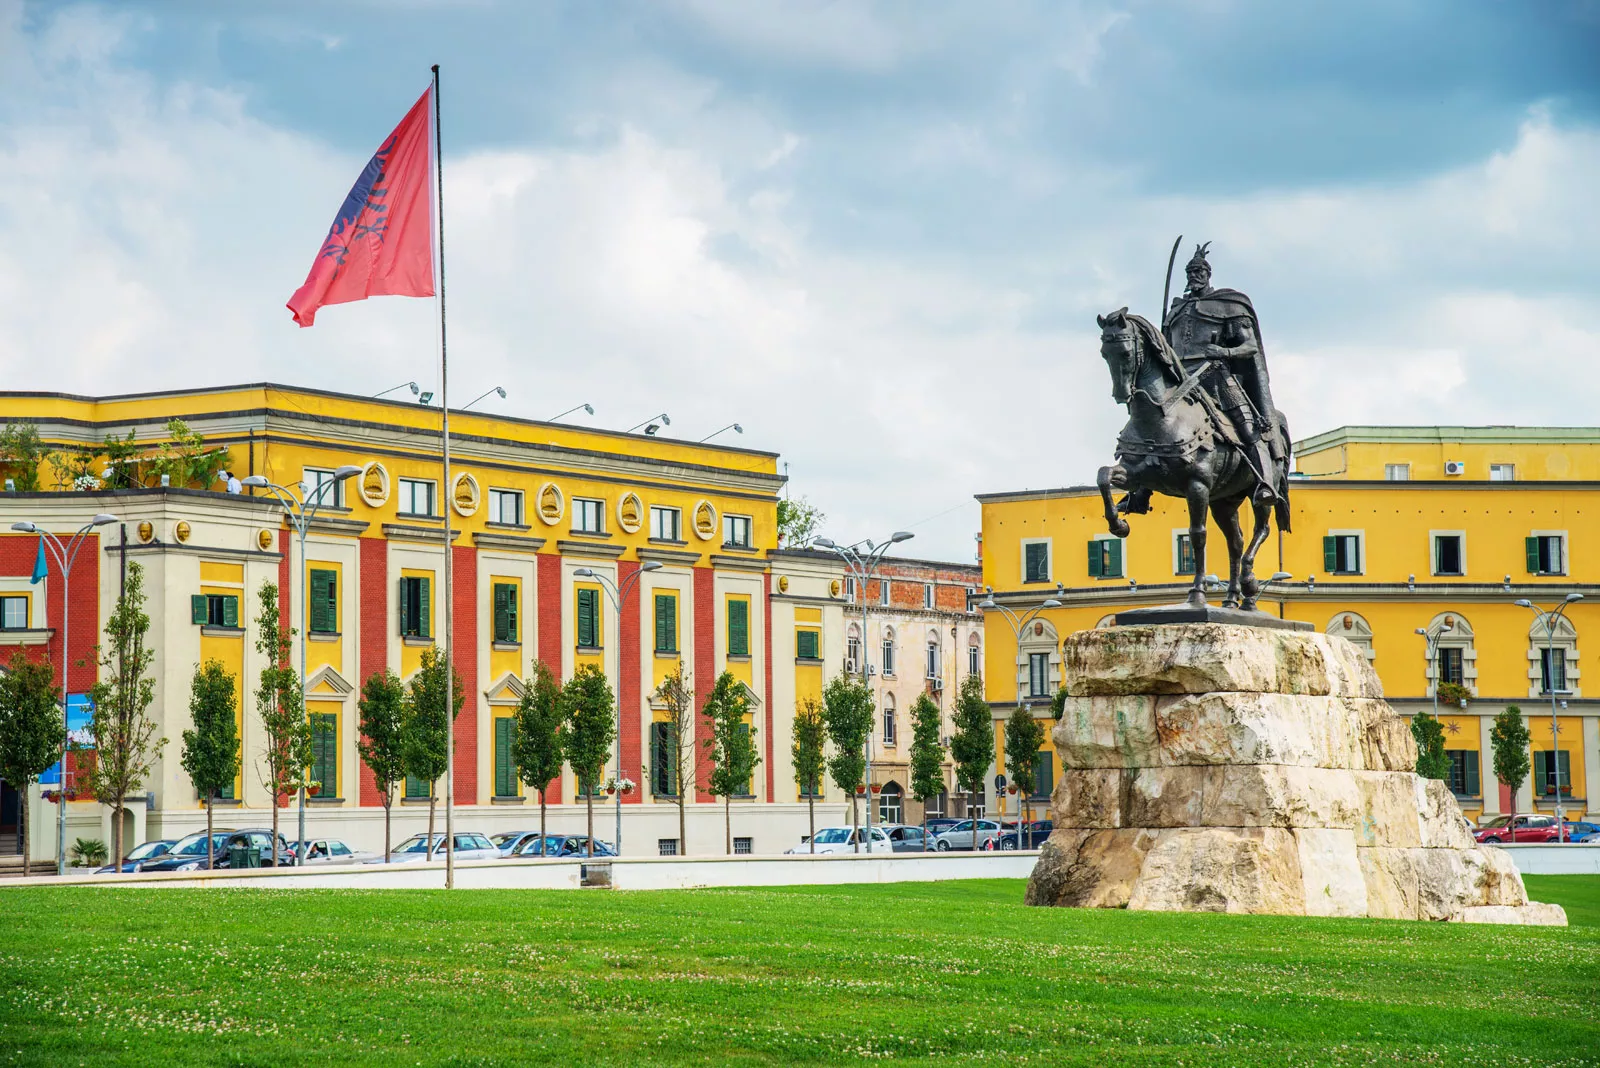 Skanderbeg Square in Albania, Europe | Architecture,Monuments - Rated 3.7